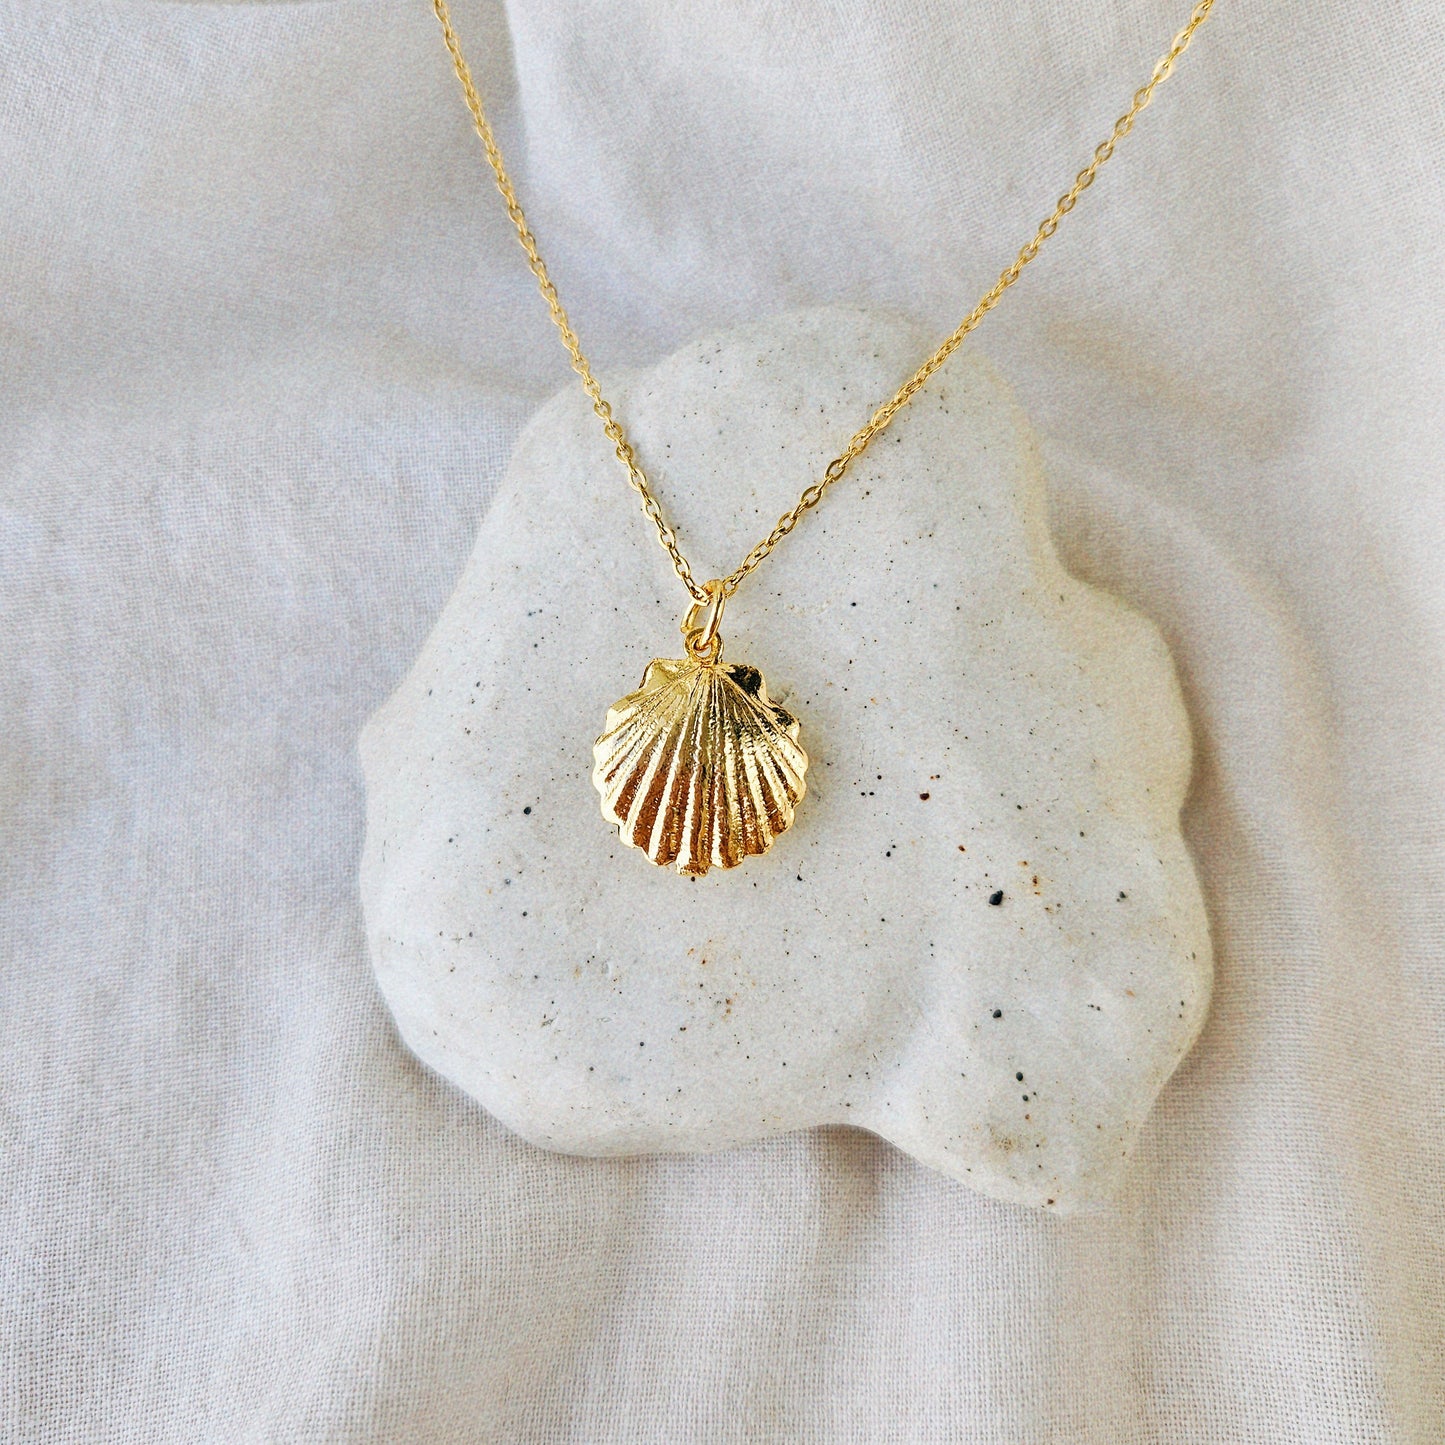 Vintage Scallop Shell Charm Necklace